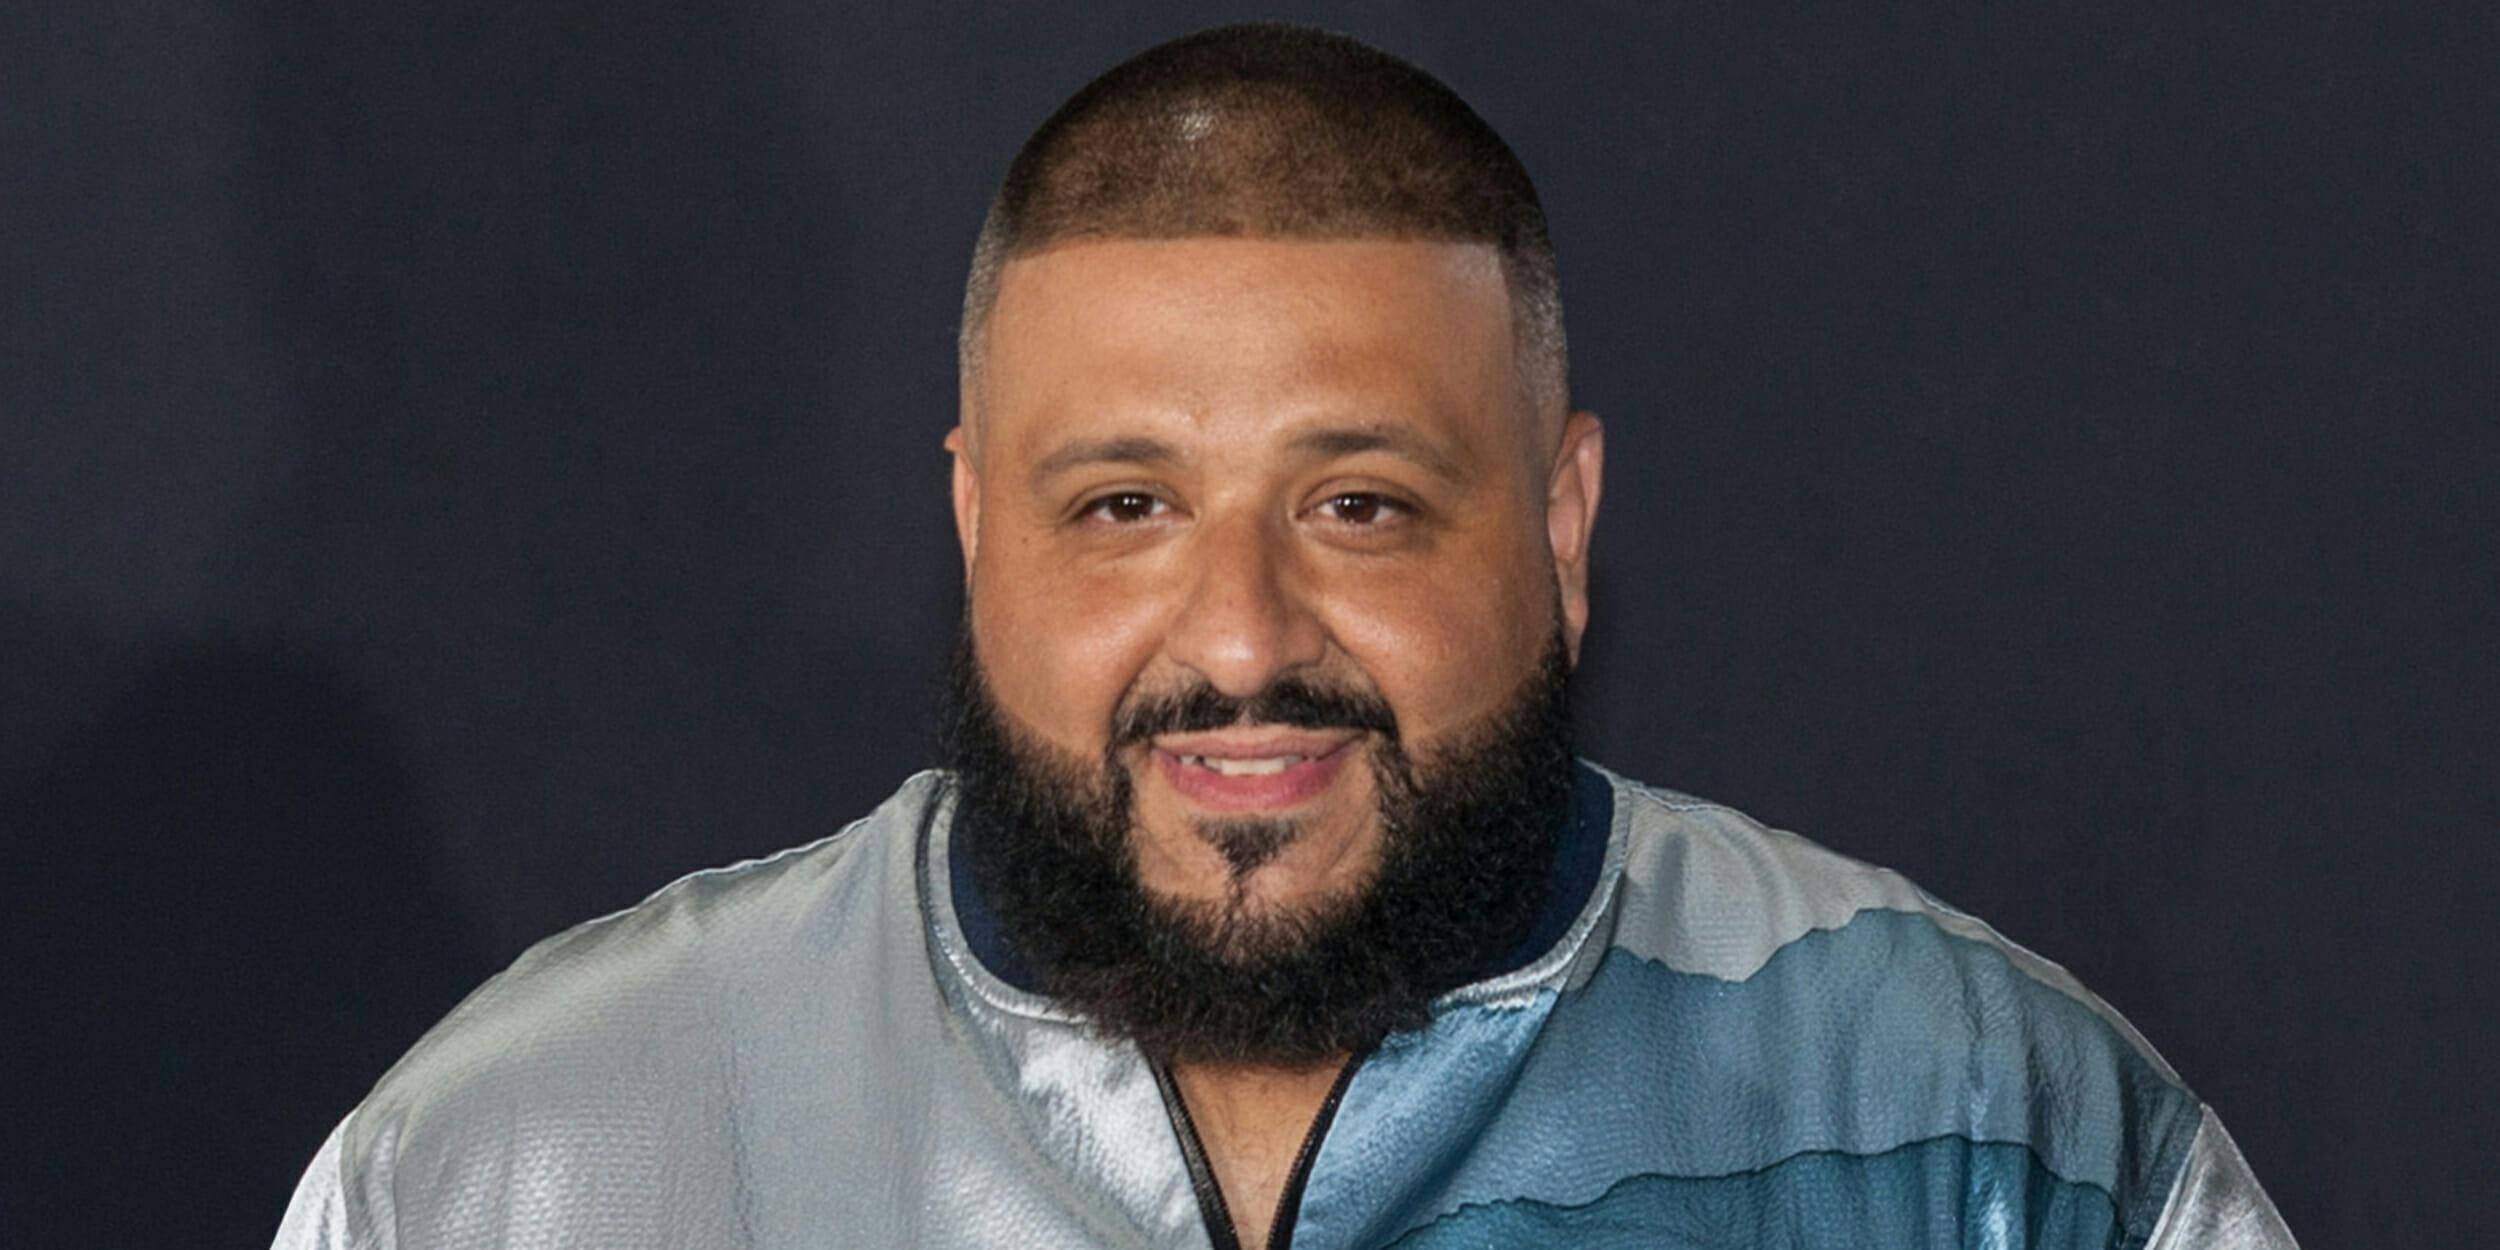 DJ Khaled won’t go down on his wife—and the internet is appalled